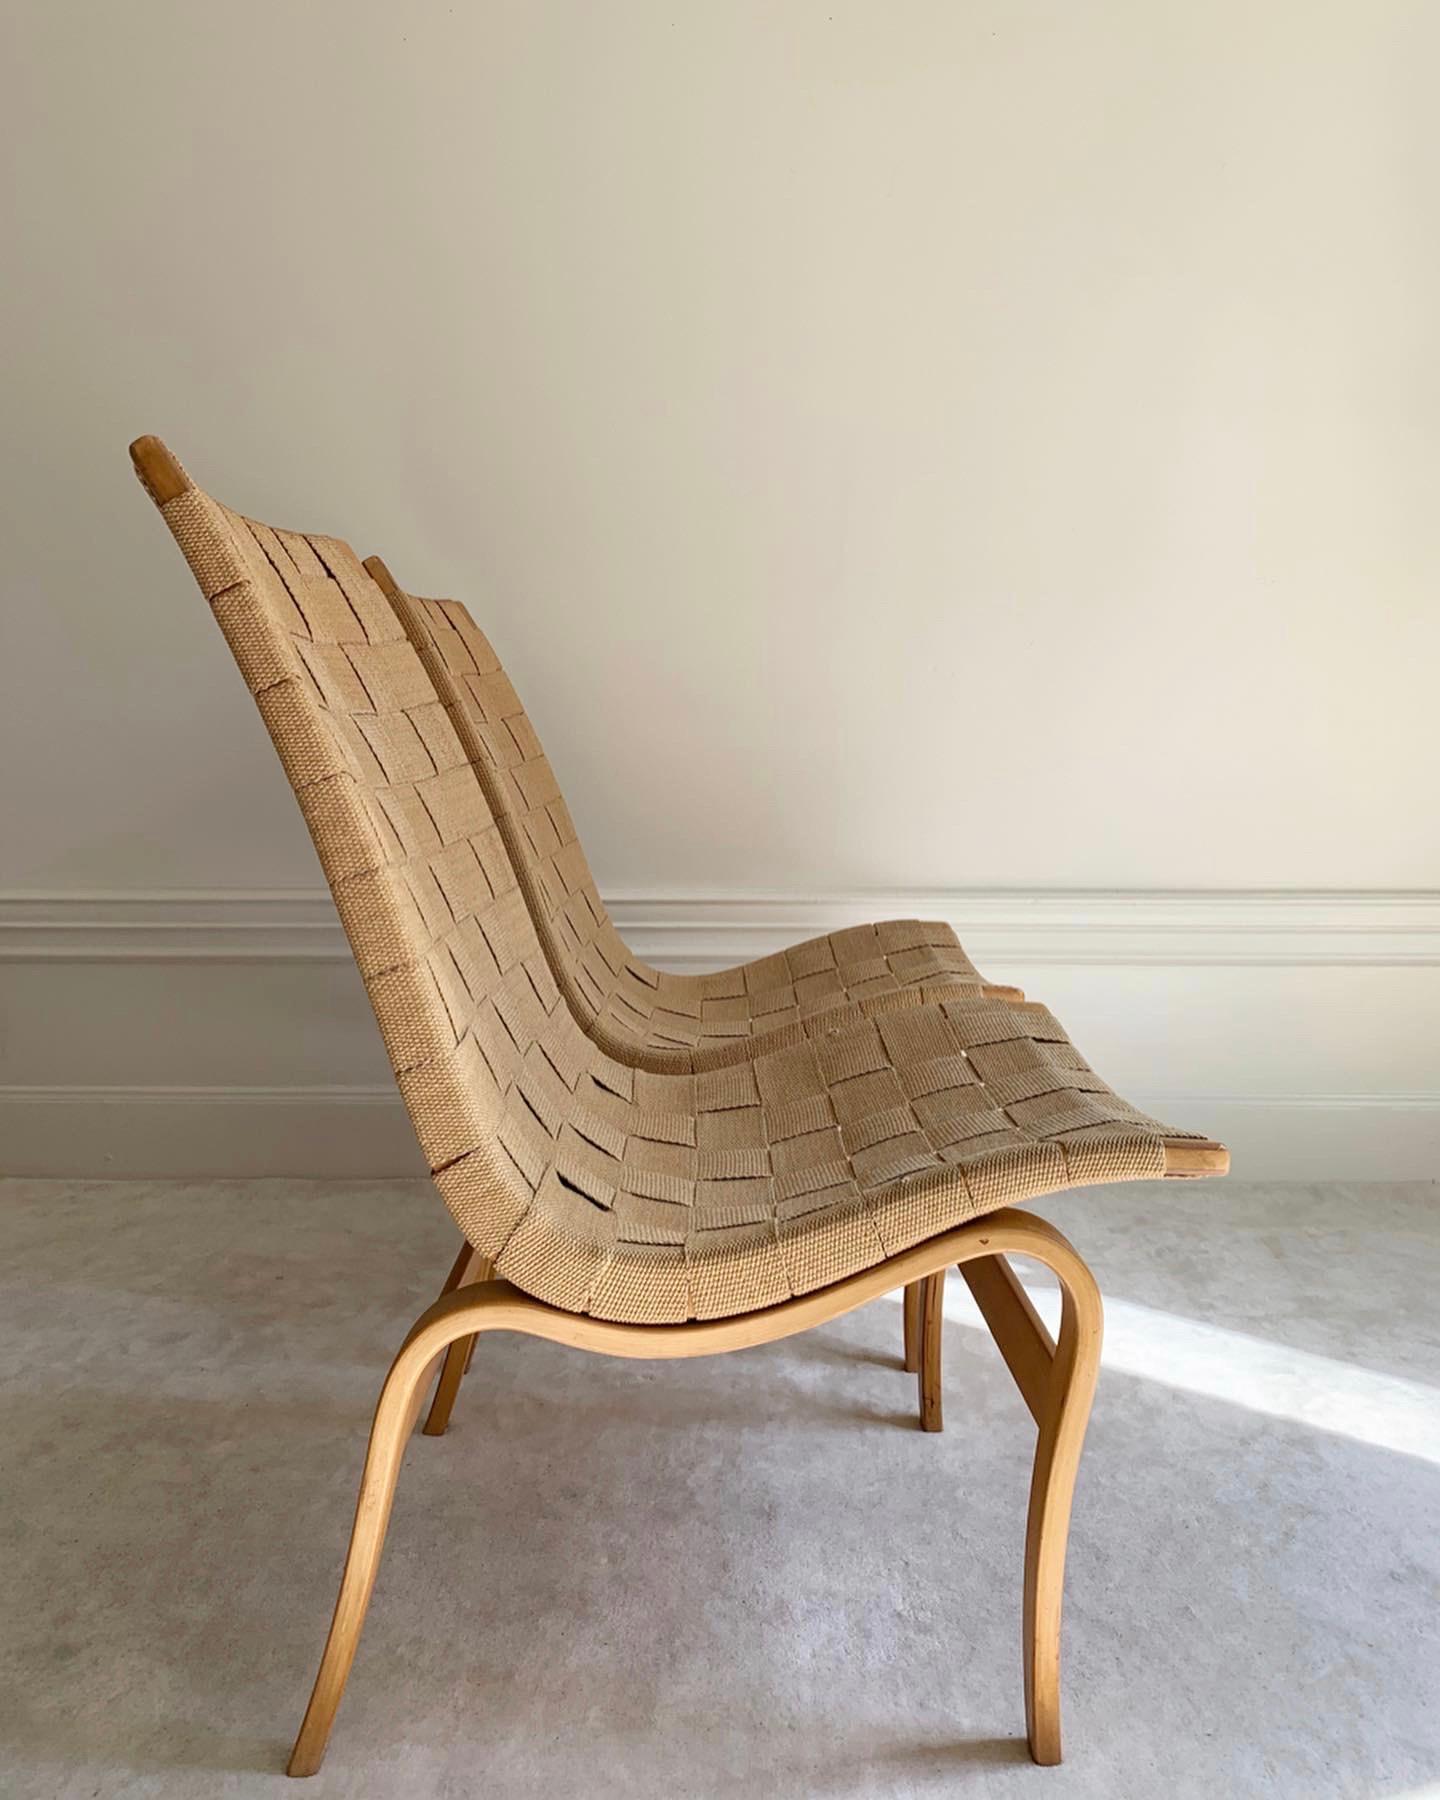 Excellent pair of 1960s matching easychair by Bruno Mathsson in good condition with minimal signs of use. Produced and signed by Karl Mathsson in Värnamo, Sweden.